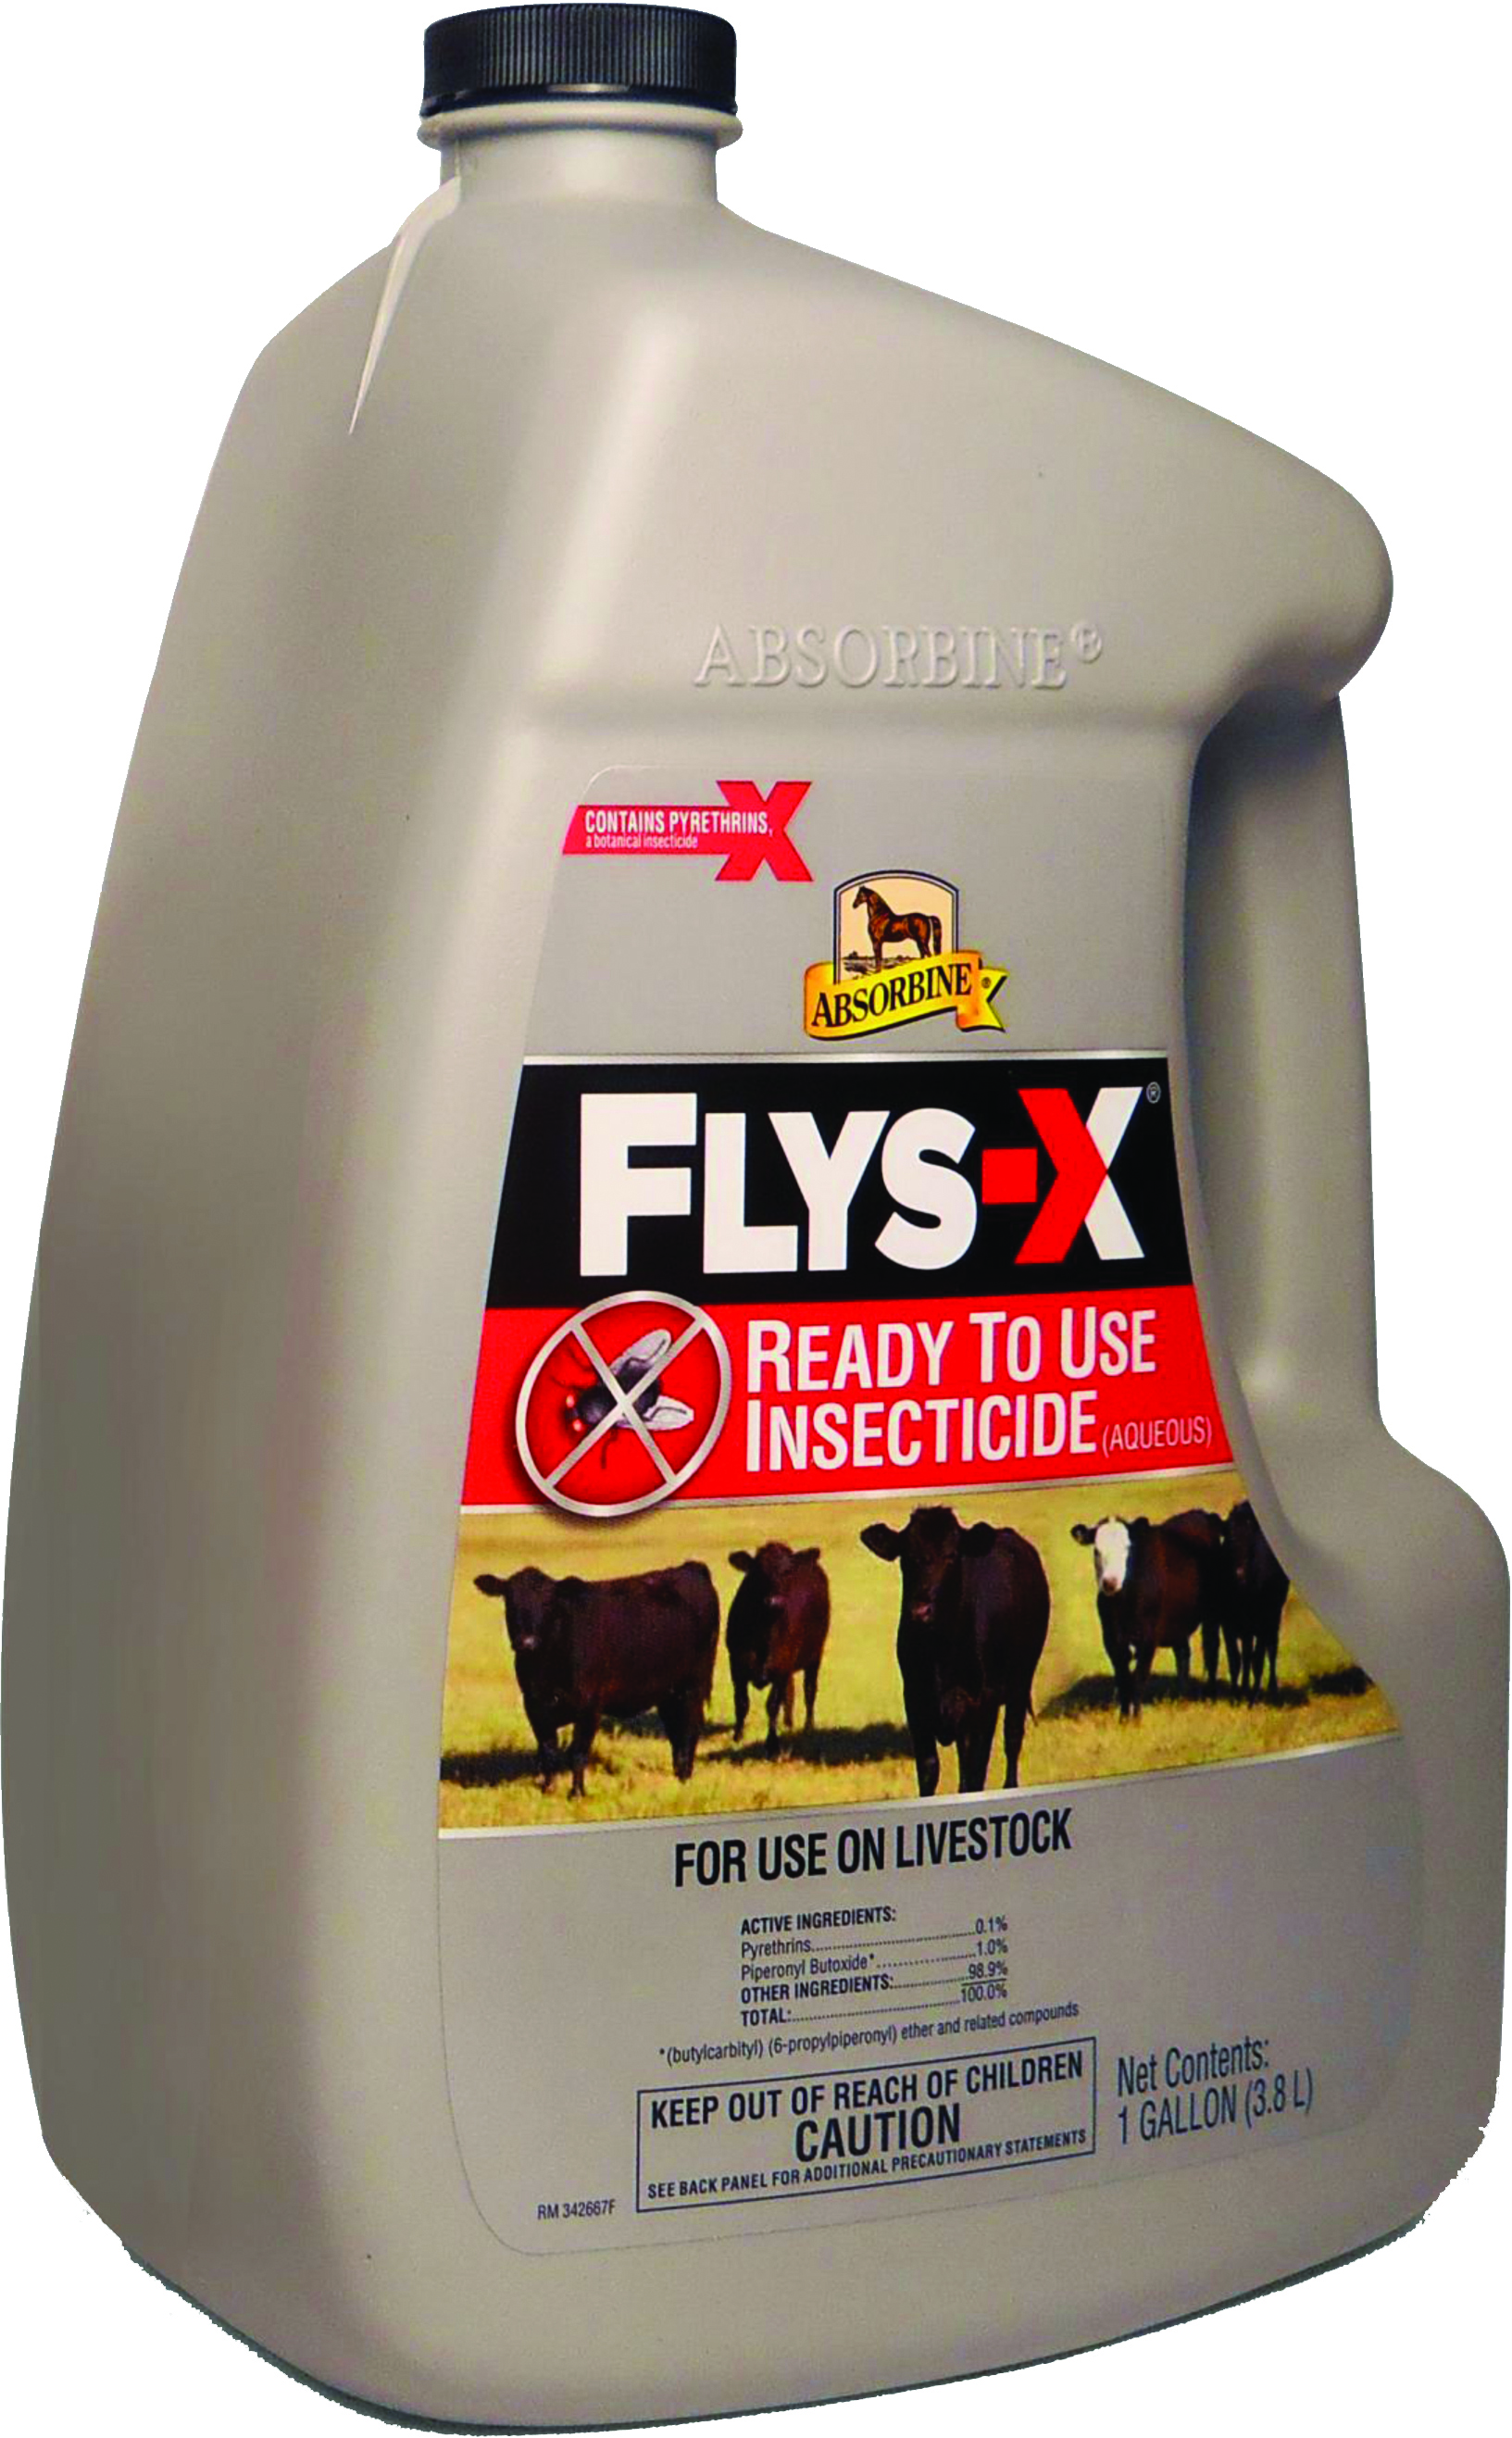 ABSORBINE FLYS-X READY-TO-USE INSECTICIDE